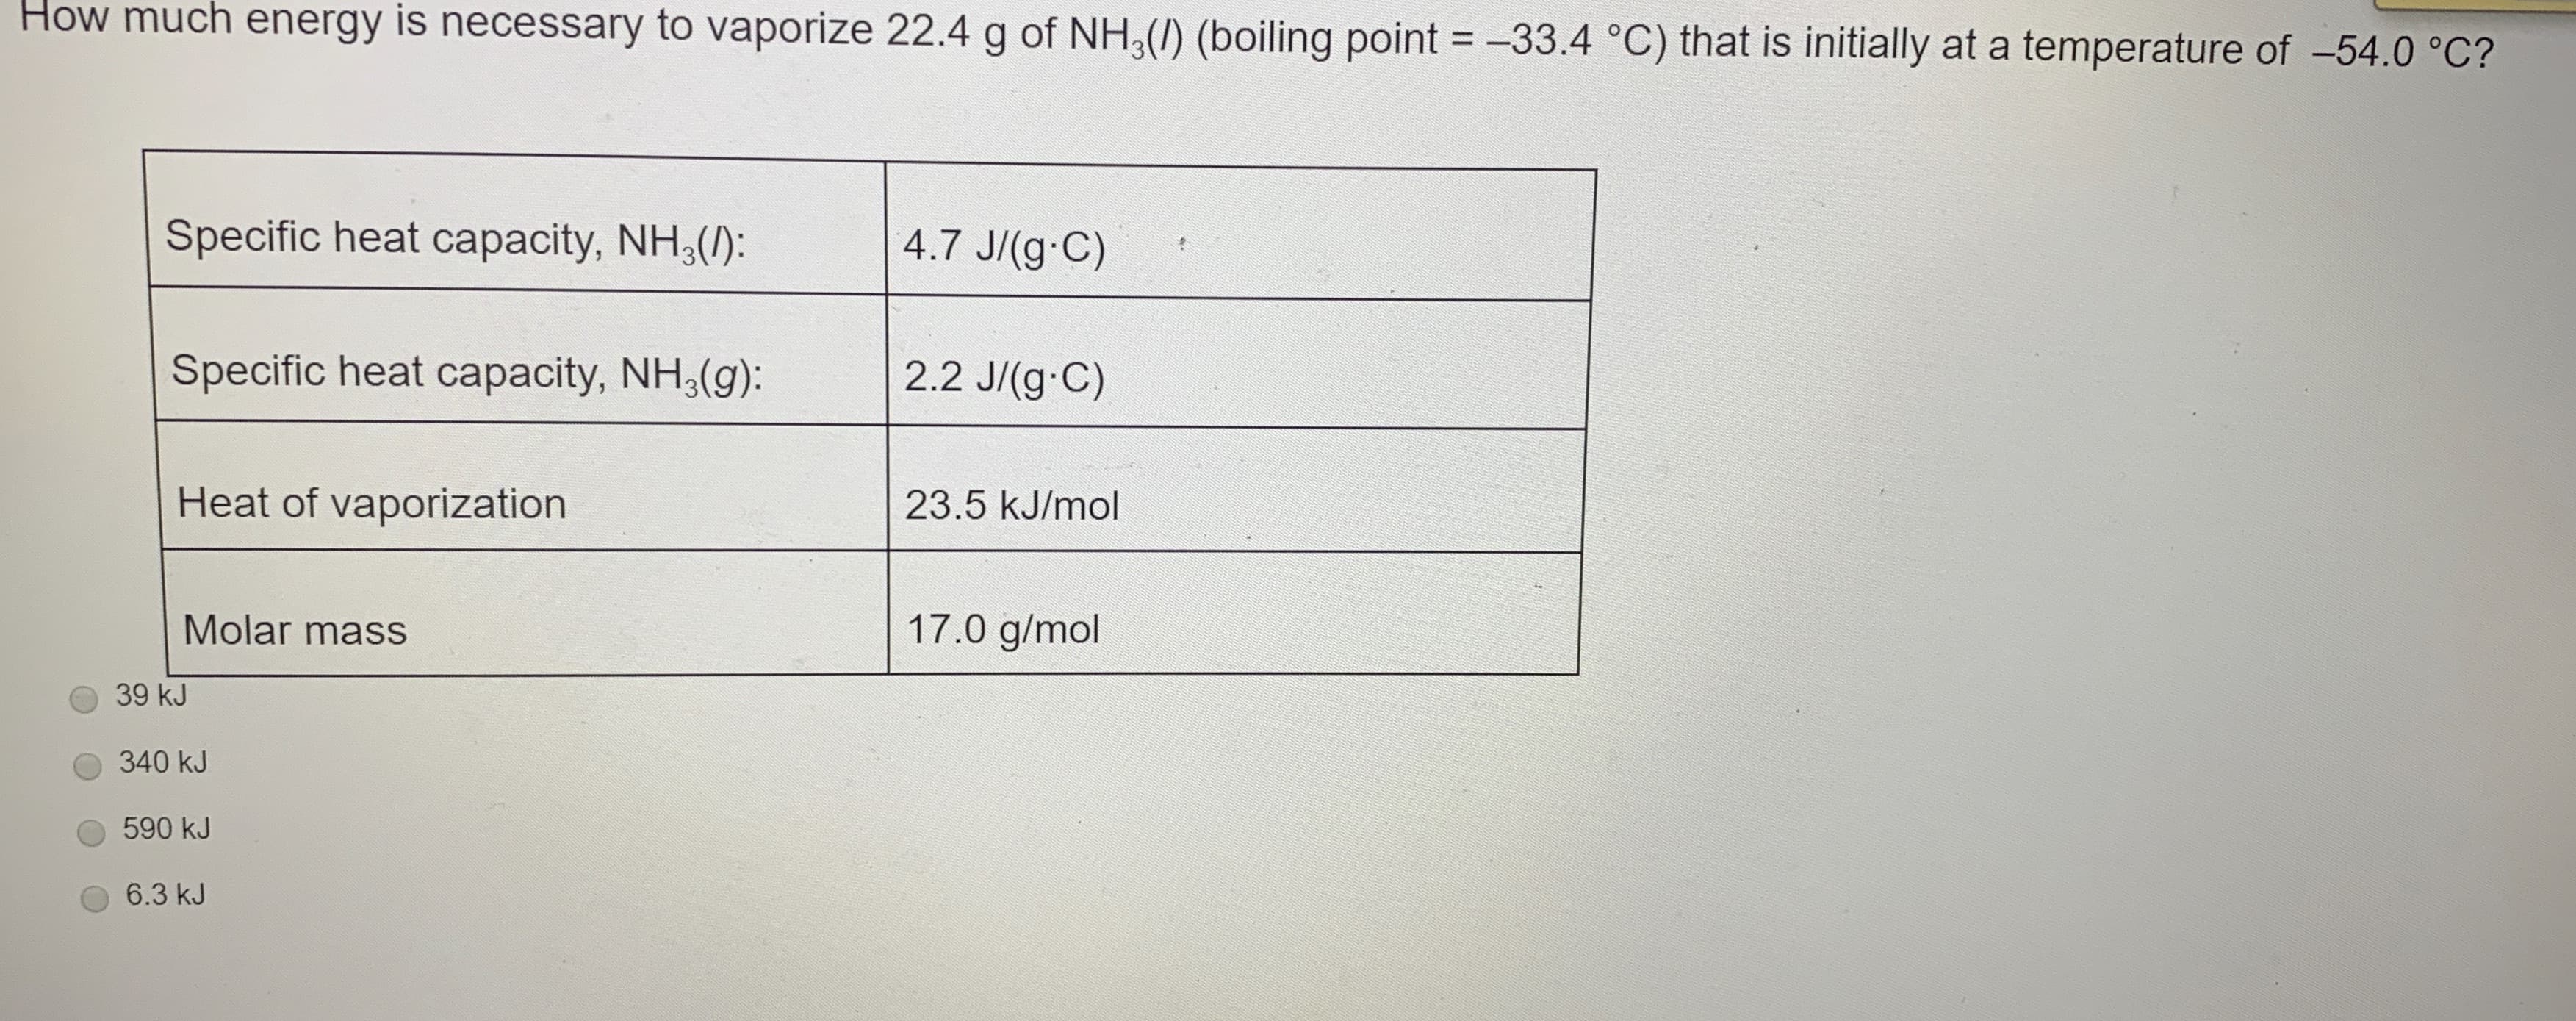 How much energy is necessary to vaporize 22.4 g of NH,(/) (boiling point = -33.4 °C) that is initially at a temperature of -54.0 °C?
Specific heat capacity, NH, ():
4.7 J/(g C)
Specific heat capacity, NH,(g):
2.2 J/(g C)
Heat of vaporization
23.5 kJ/mol
Molar mass
17.0 g/mol
39 kJ
340 kJ
590 kJ
6.3 kJ
